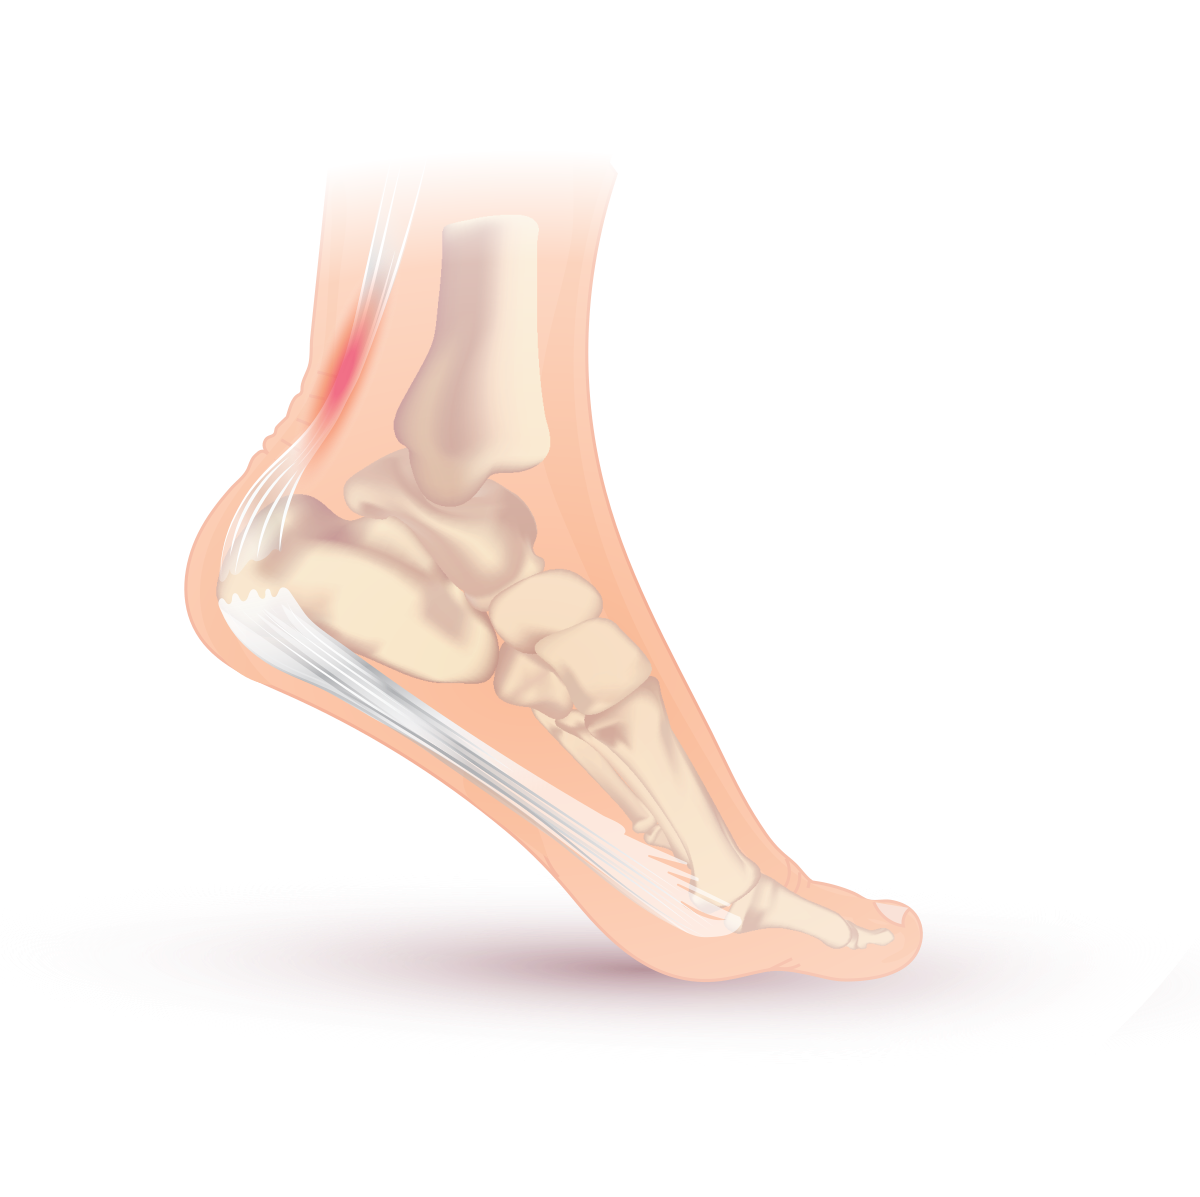 What You Need to Know About Achilles Tendonitis